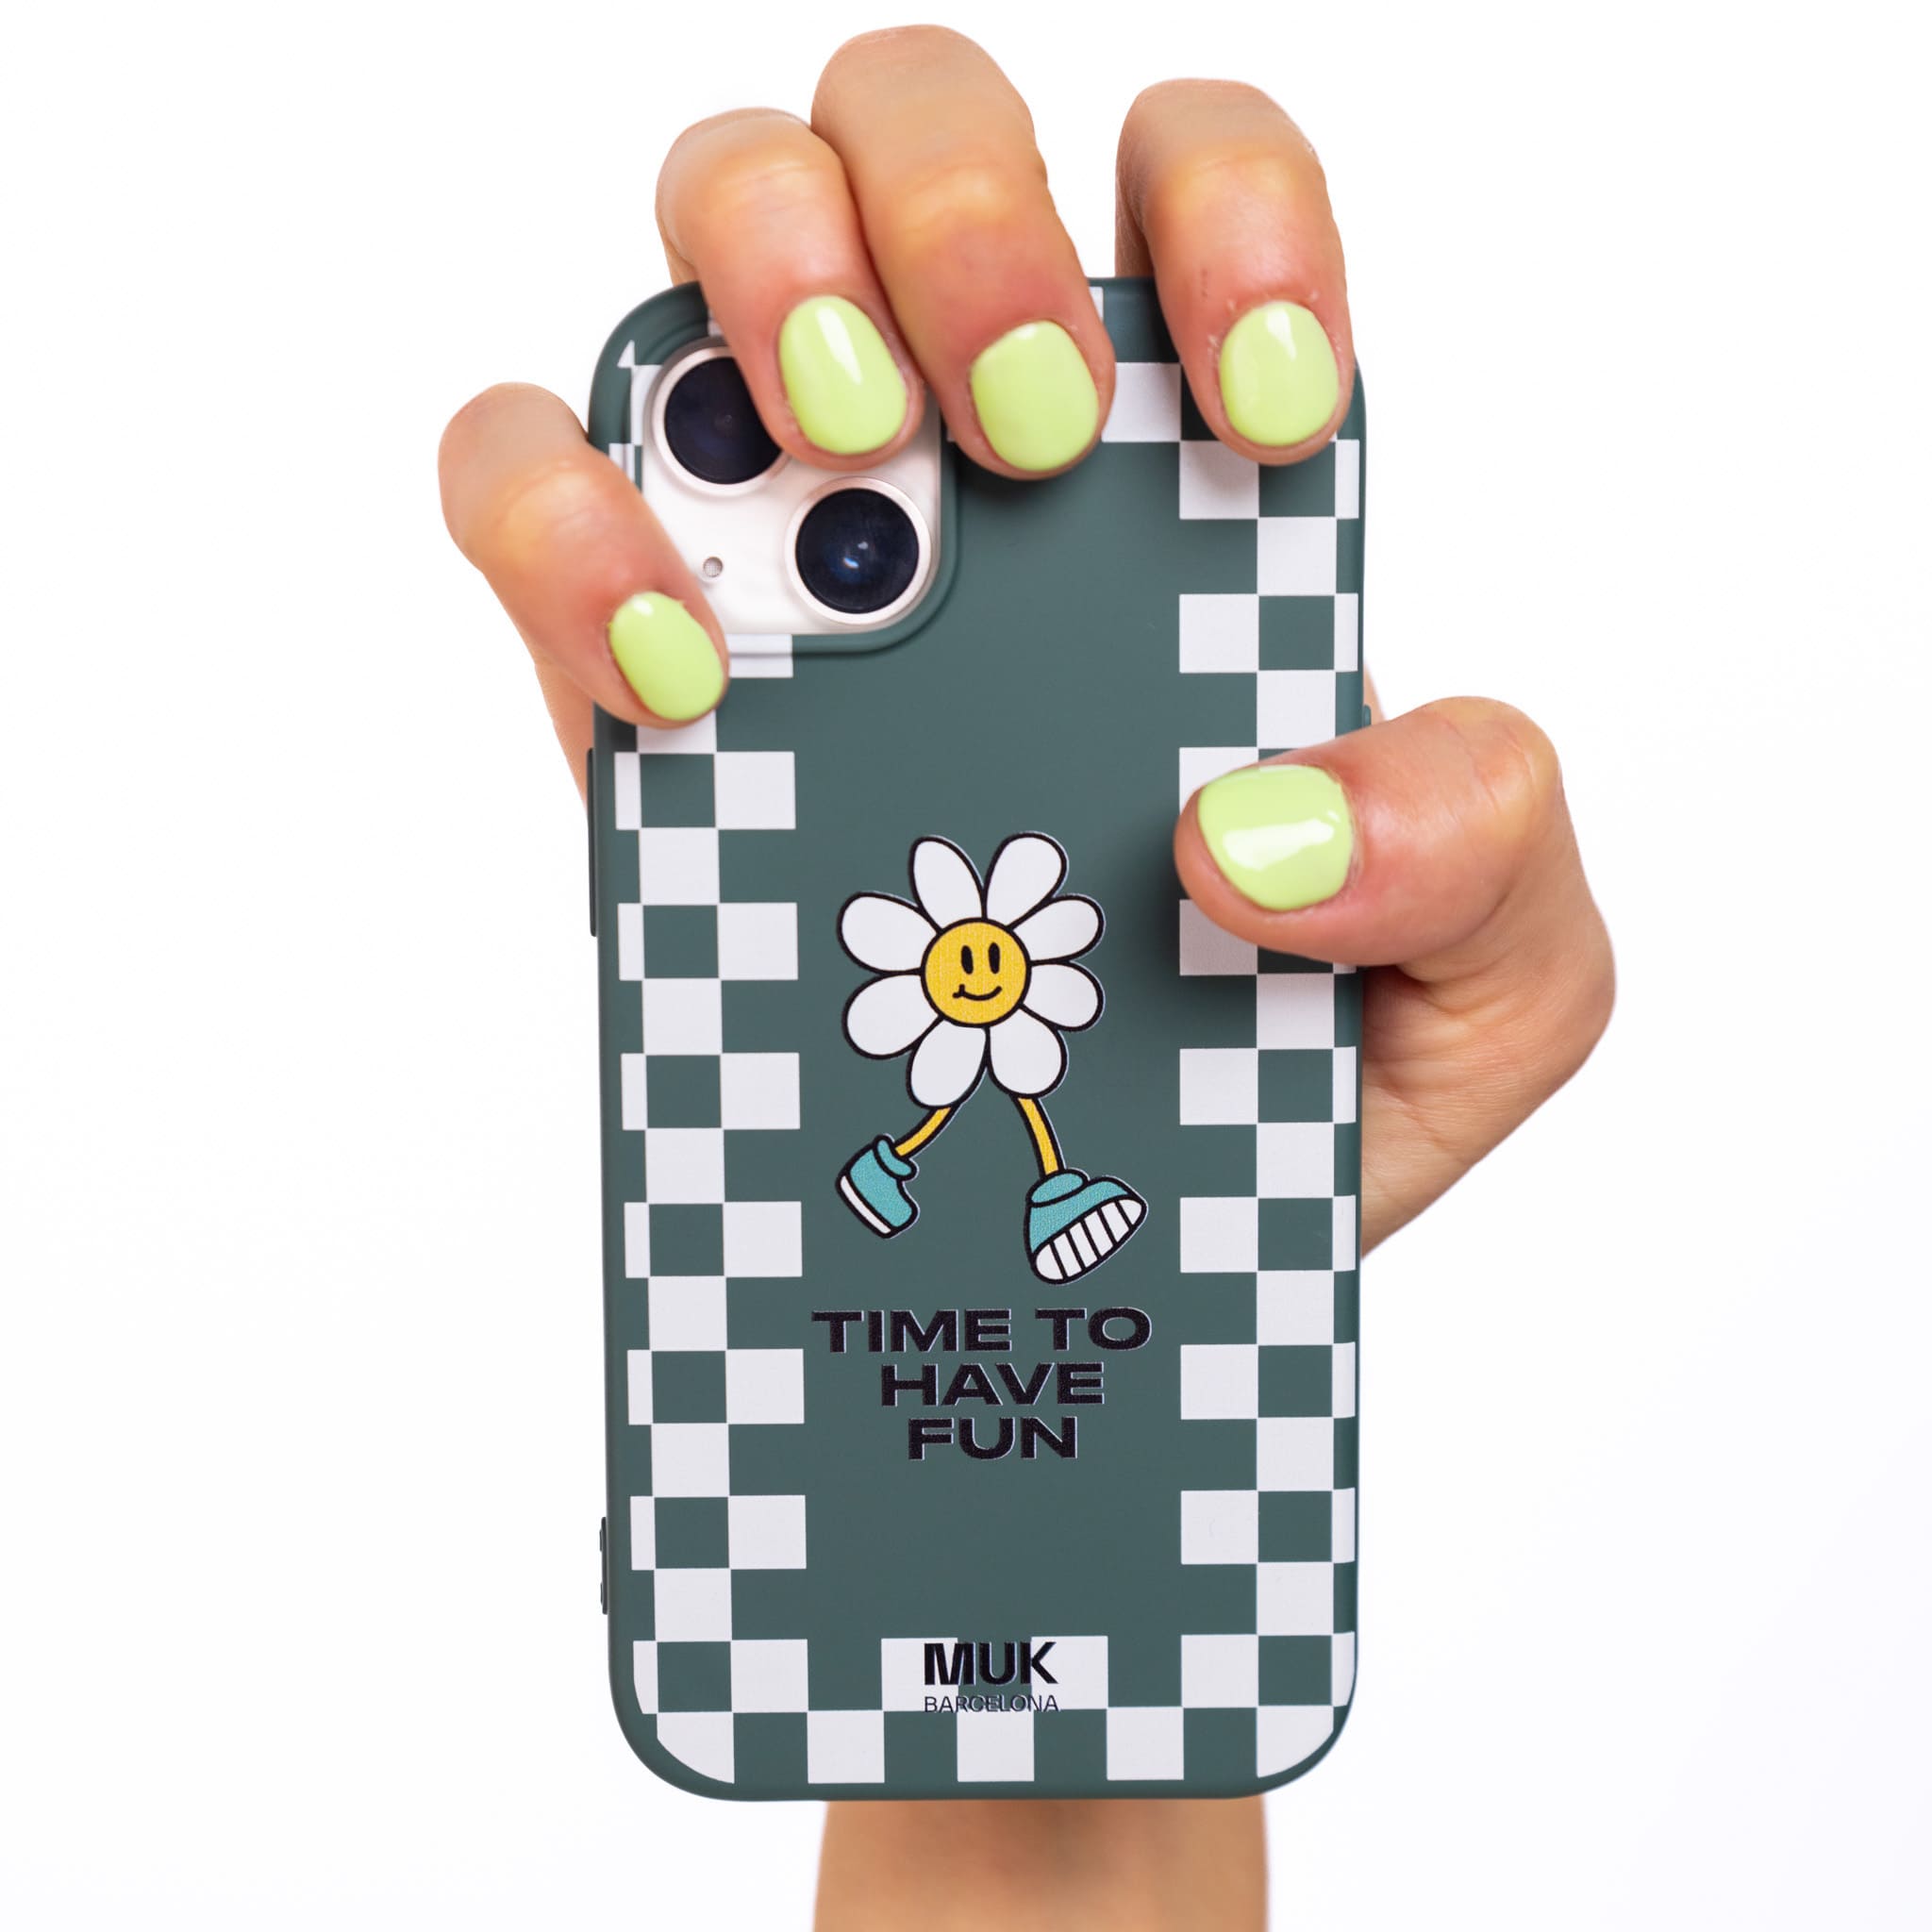 Lagoon TPU  Phone Case with white checkered pattern and daisy design and phrase "time to have fun".
